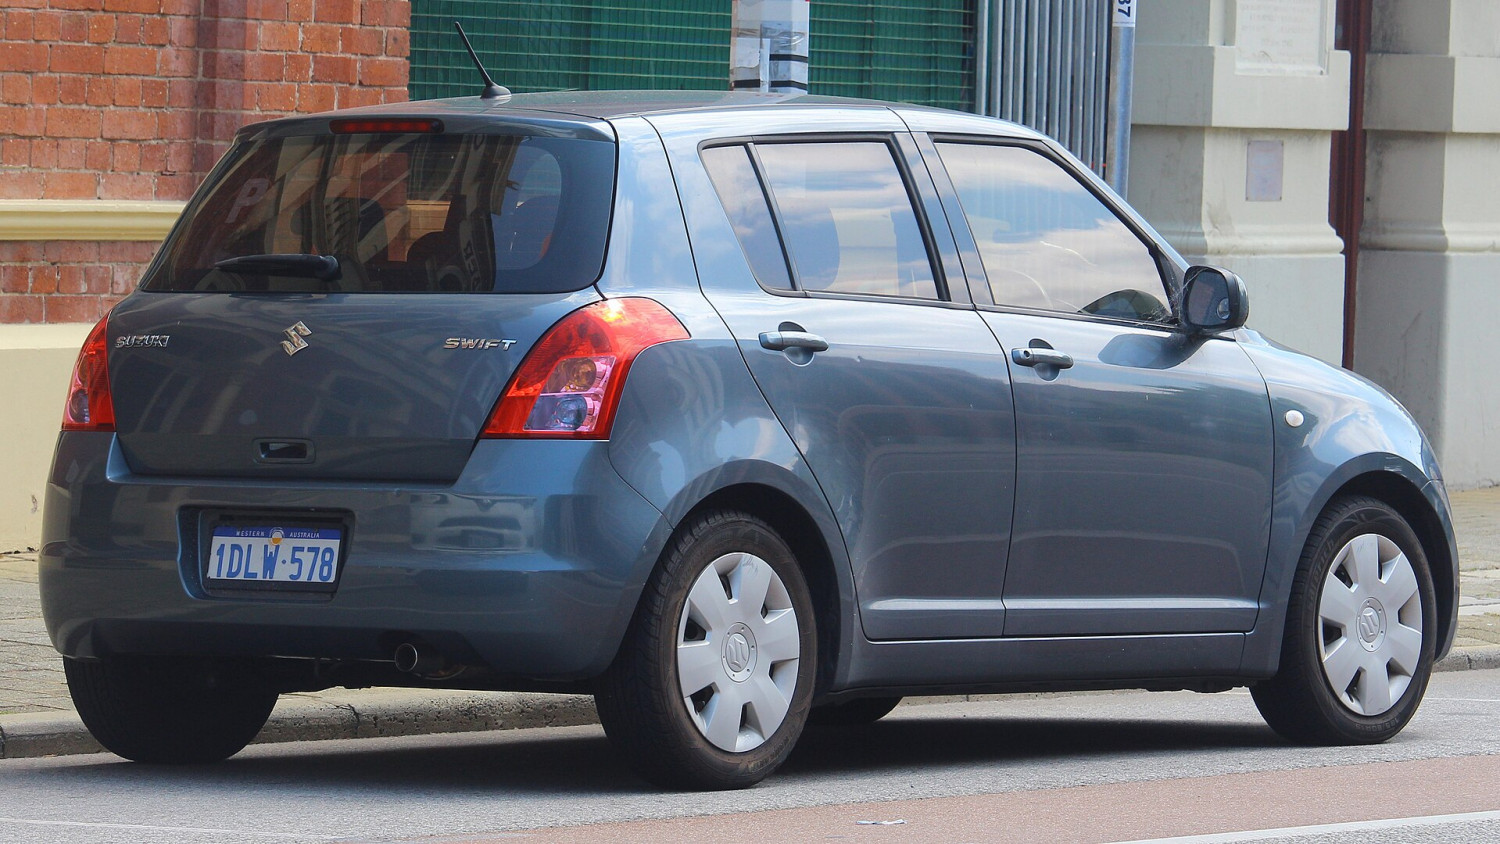 Example of a Swift 1